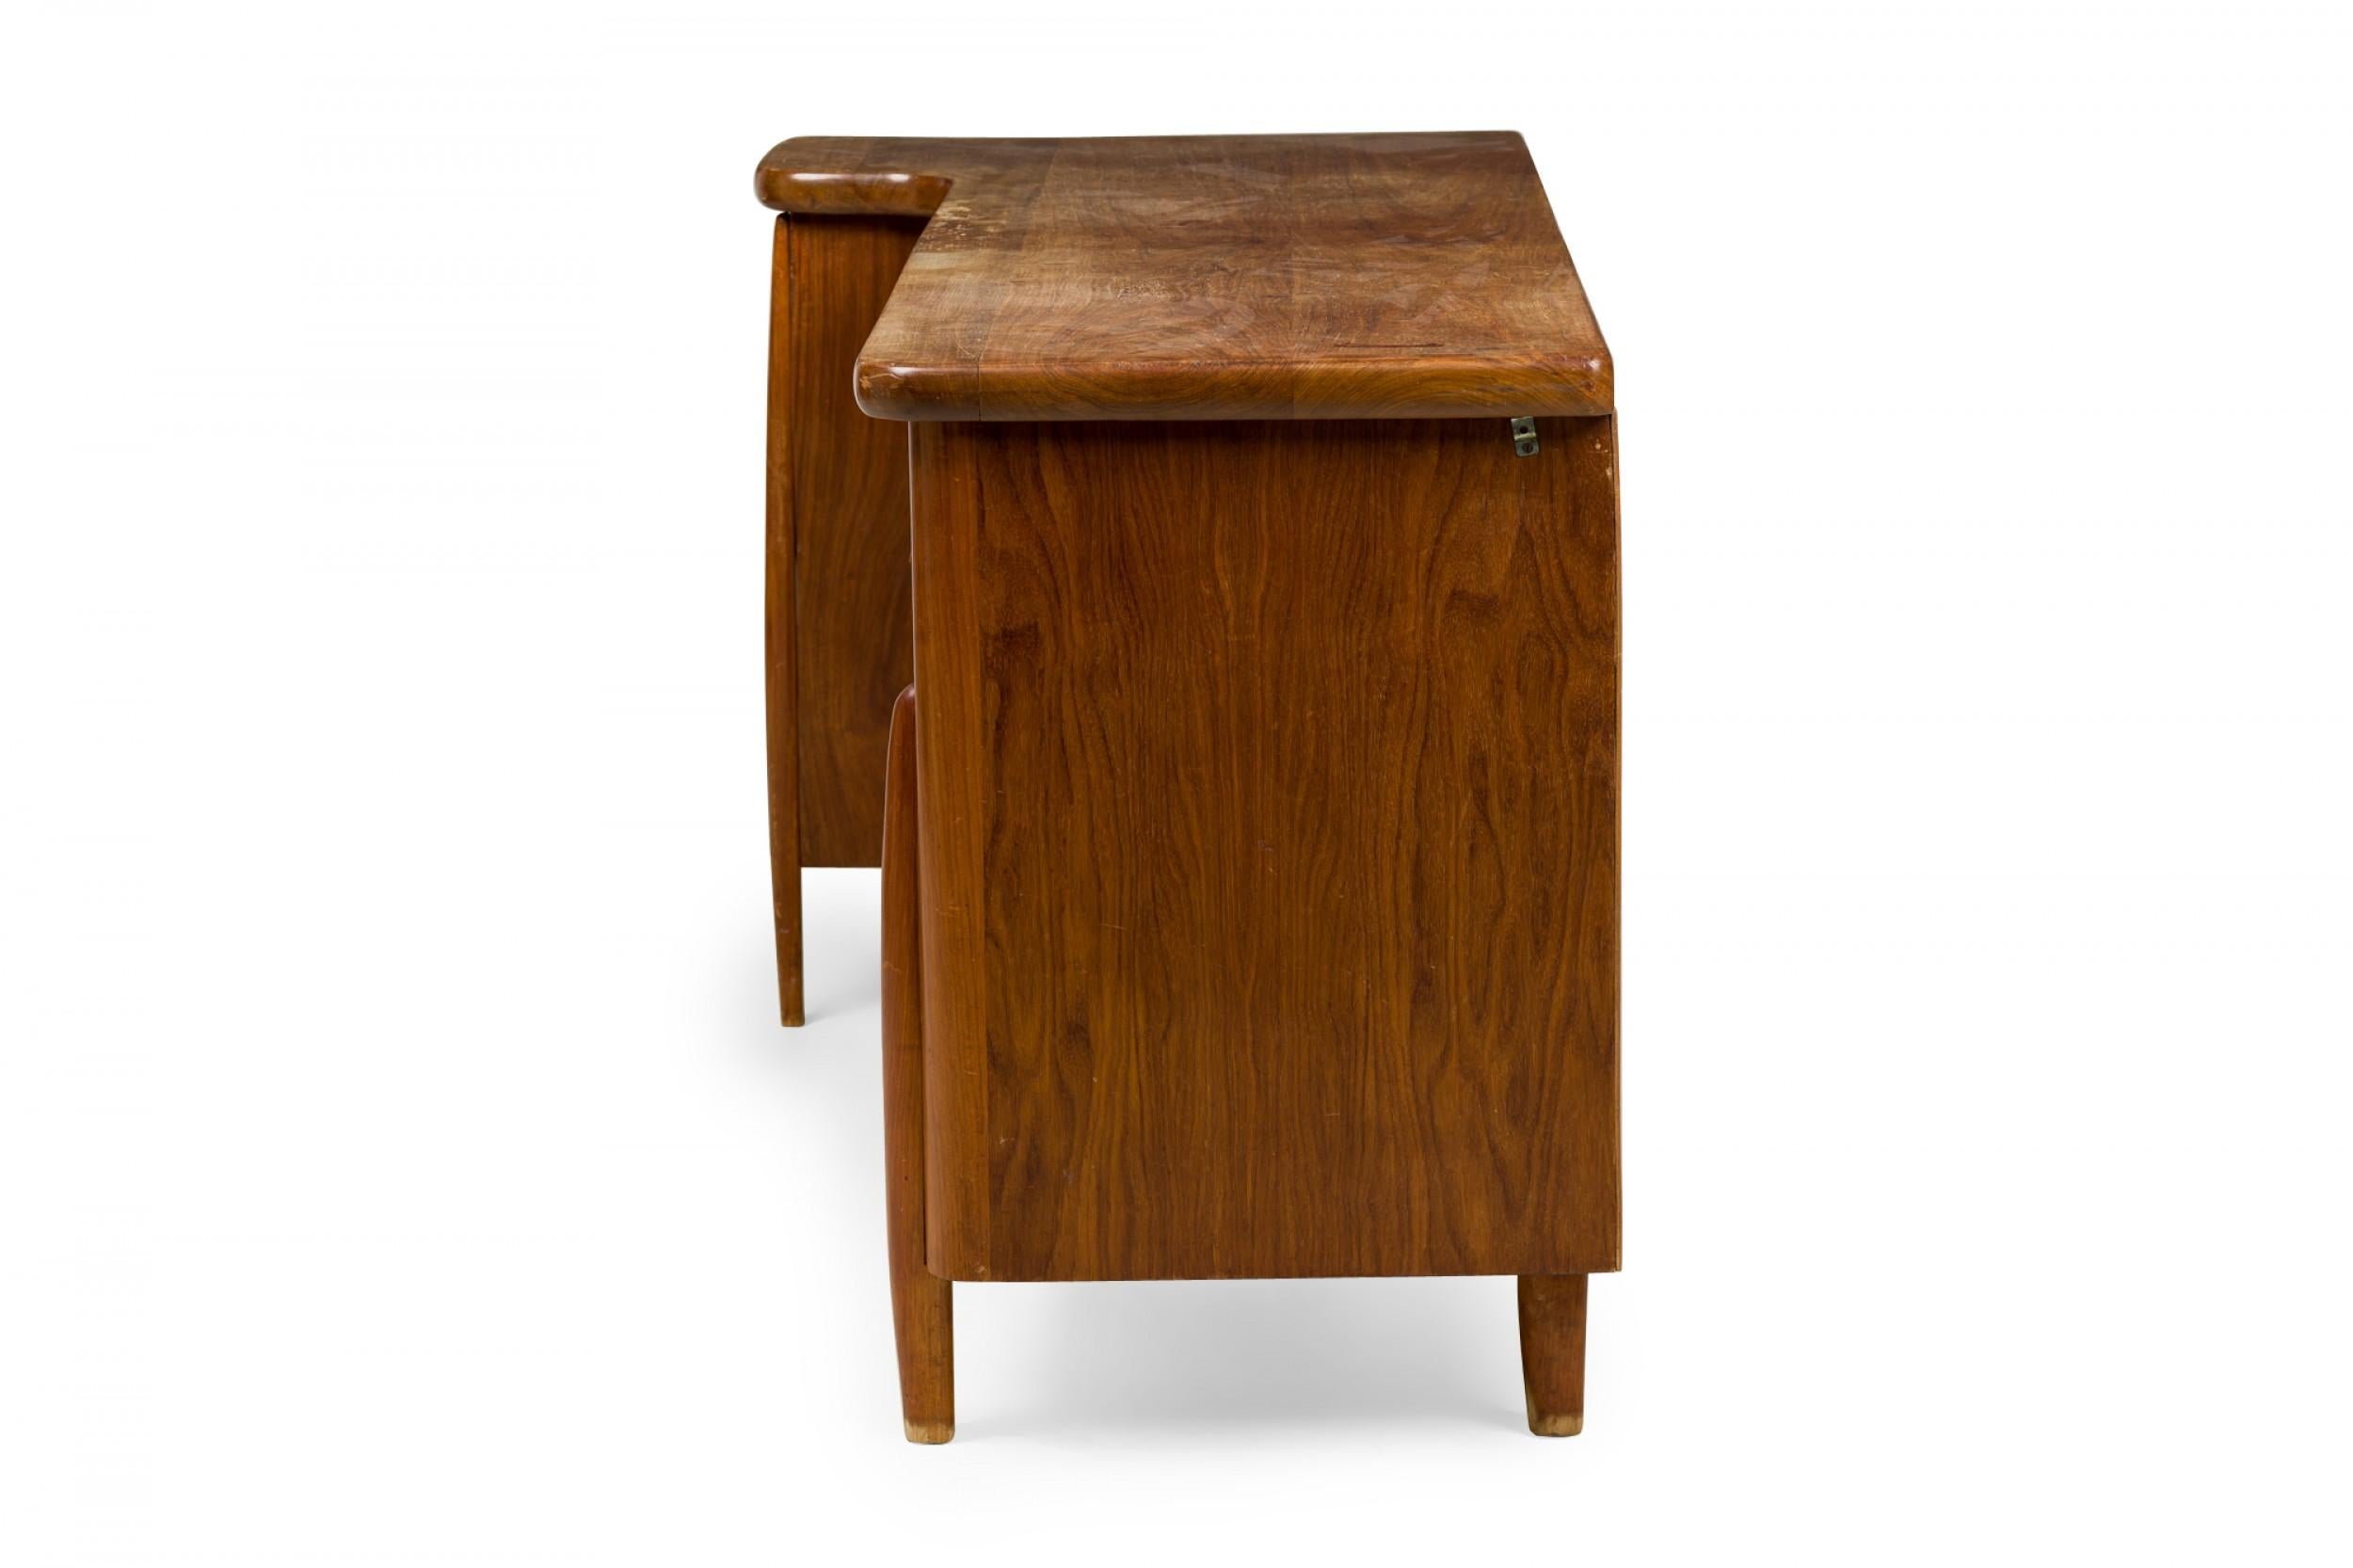 Italian Mid-Century Modern Walnut Desk, Style of Gio Ponti In Good Condition For Sale In New York, NY